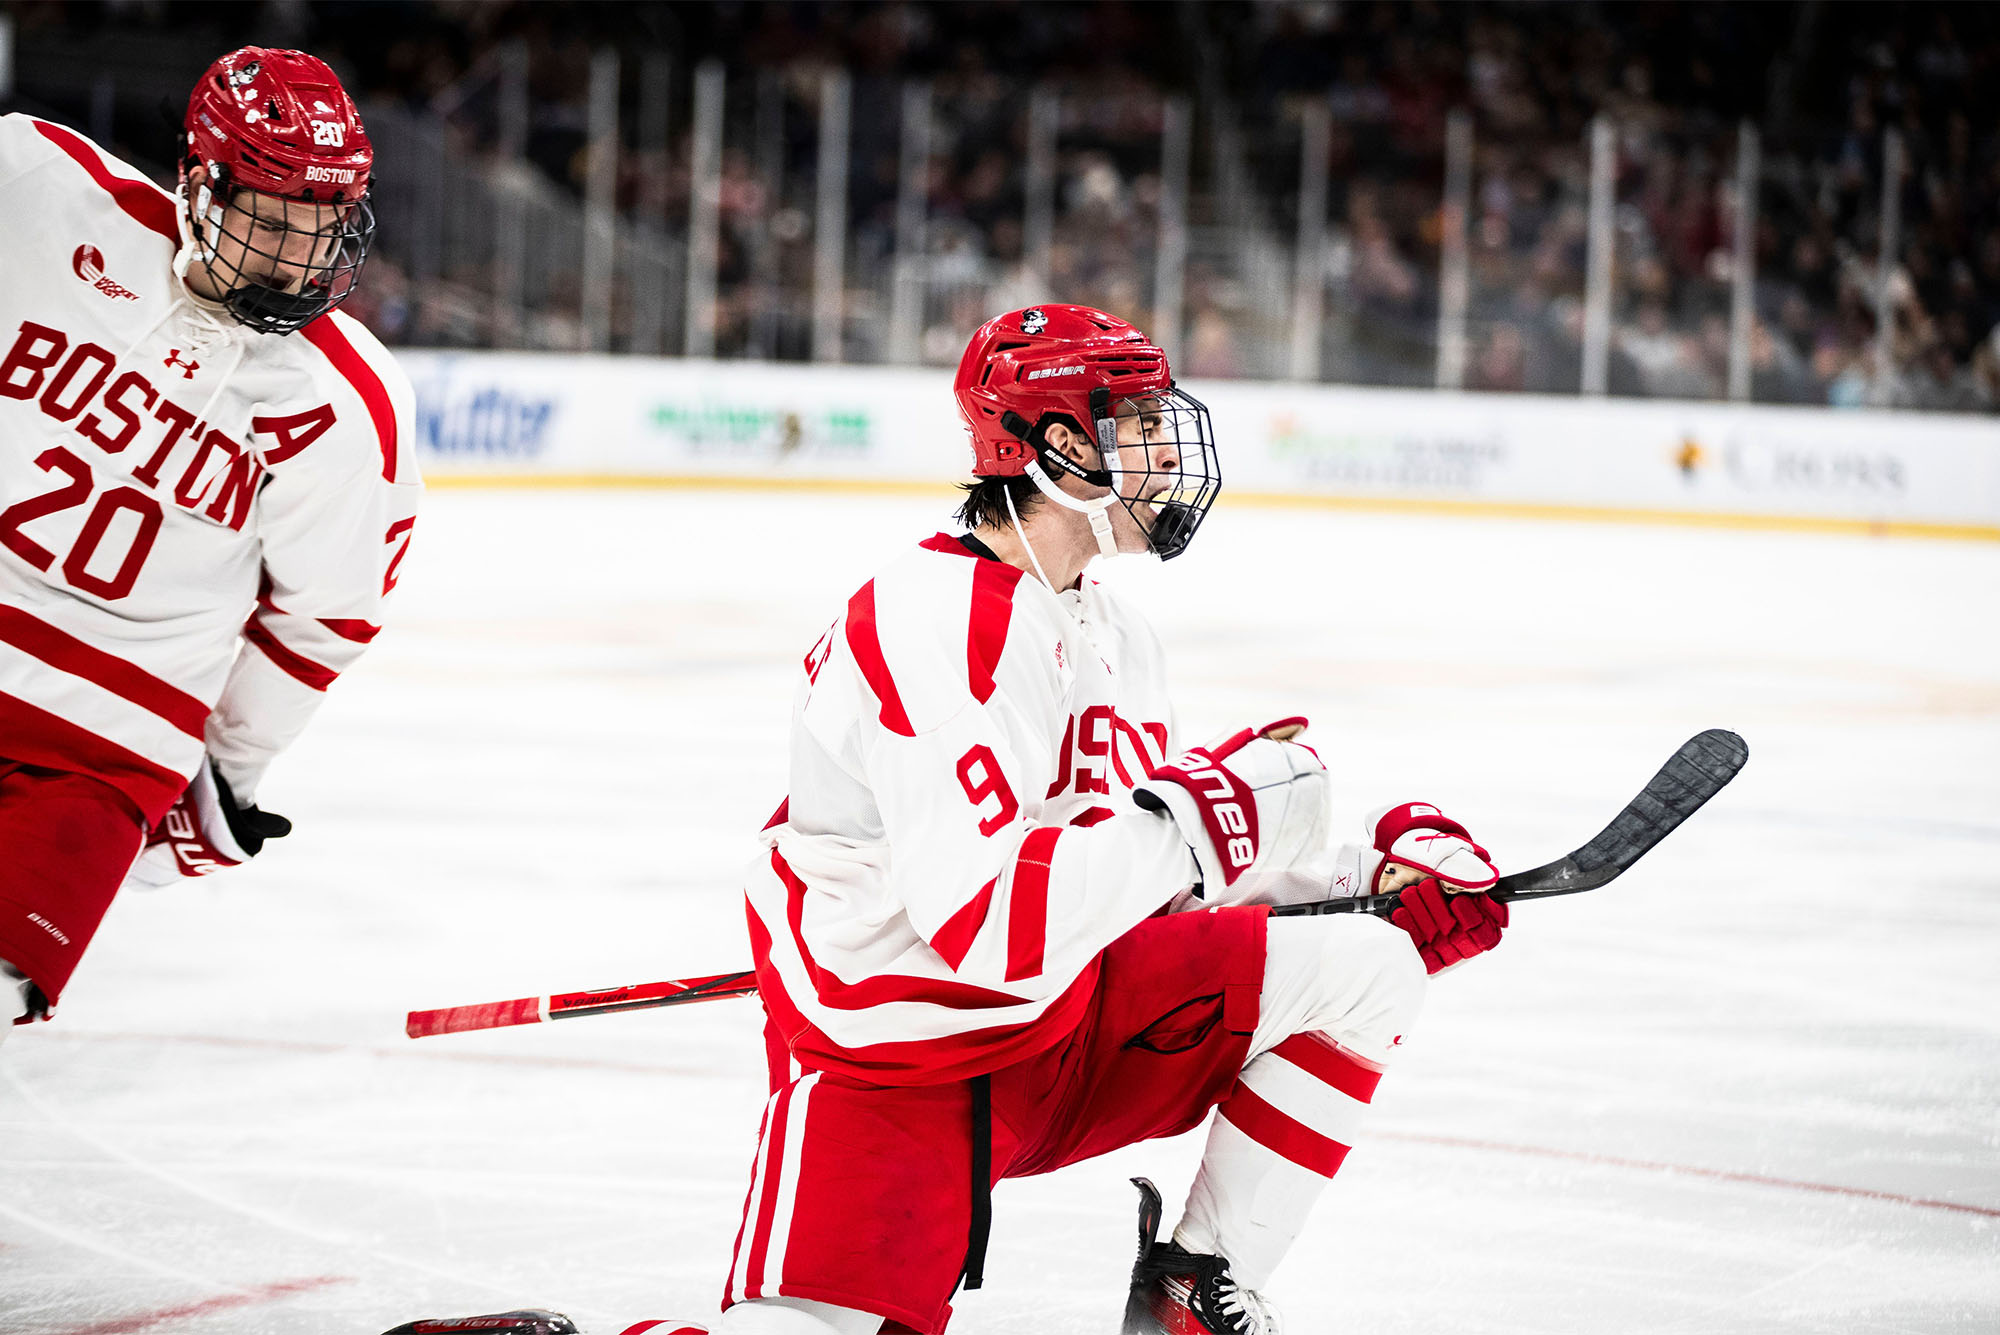 Photo: A BU college hockey player in red and white jersey pumps their fist after scoring a goal